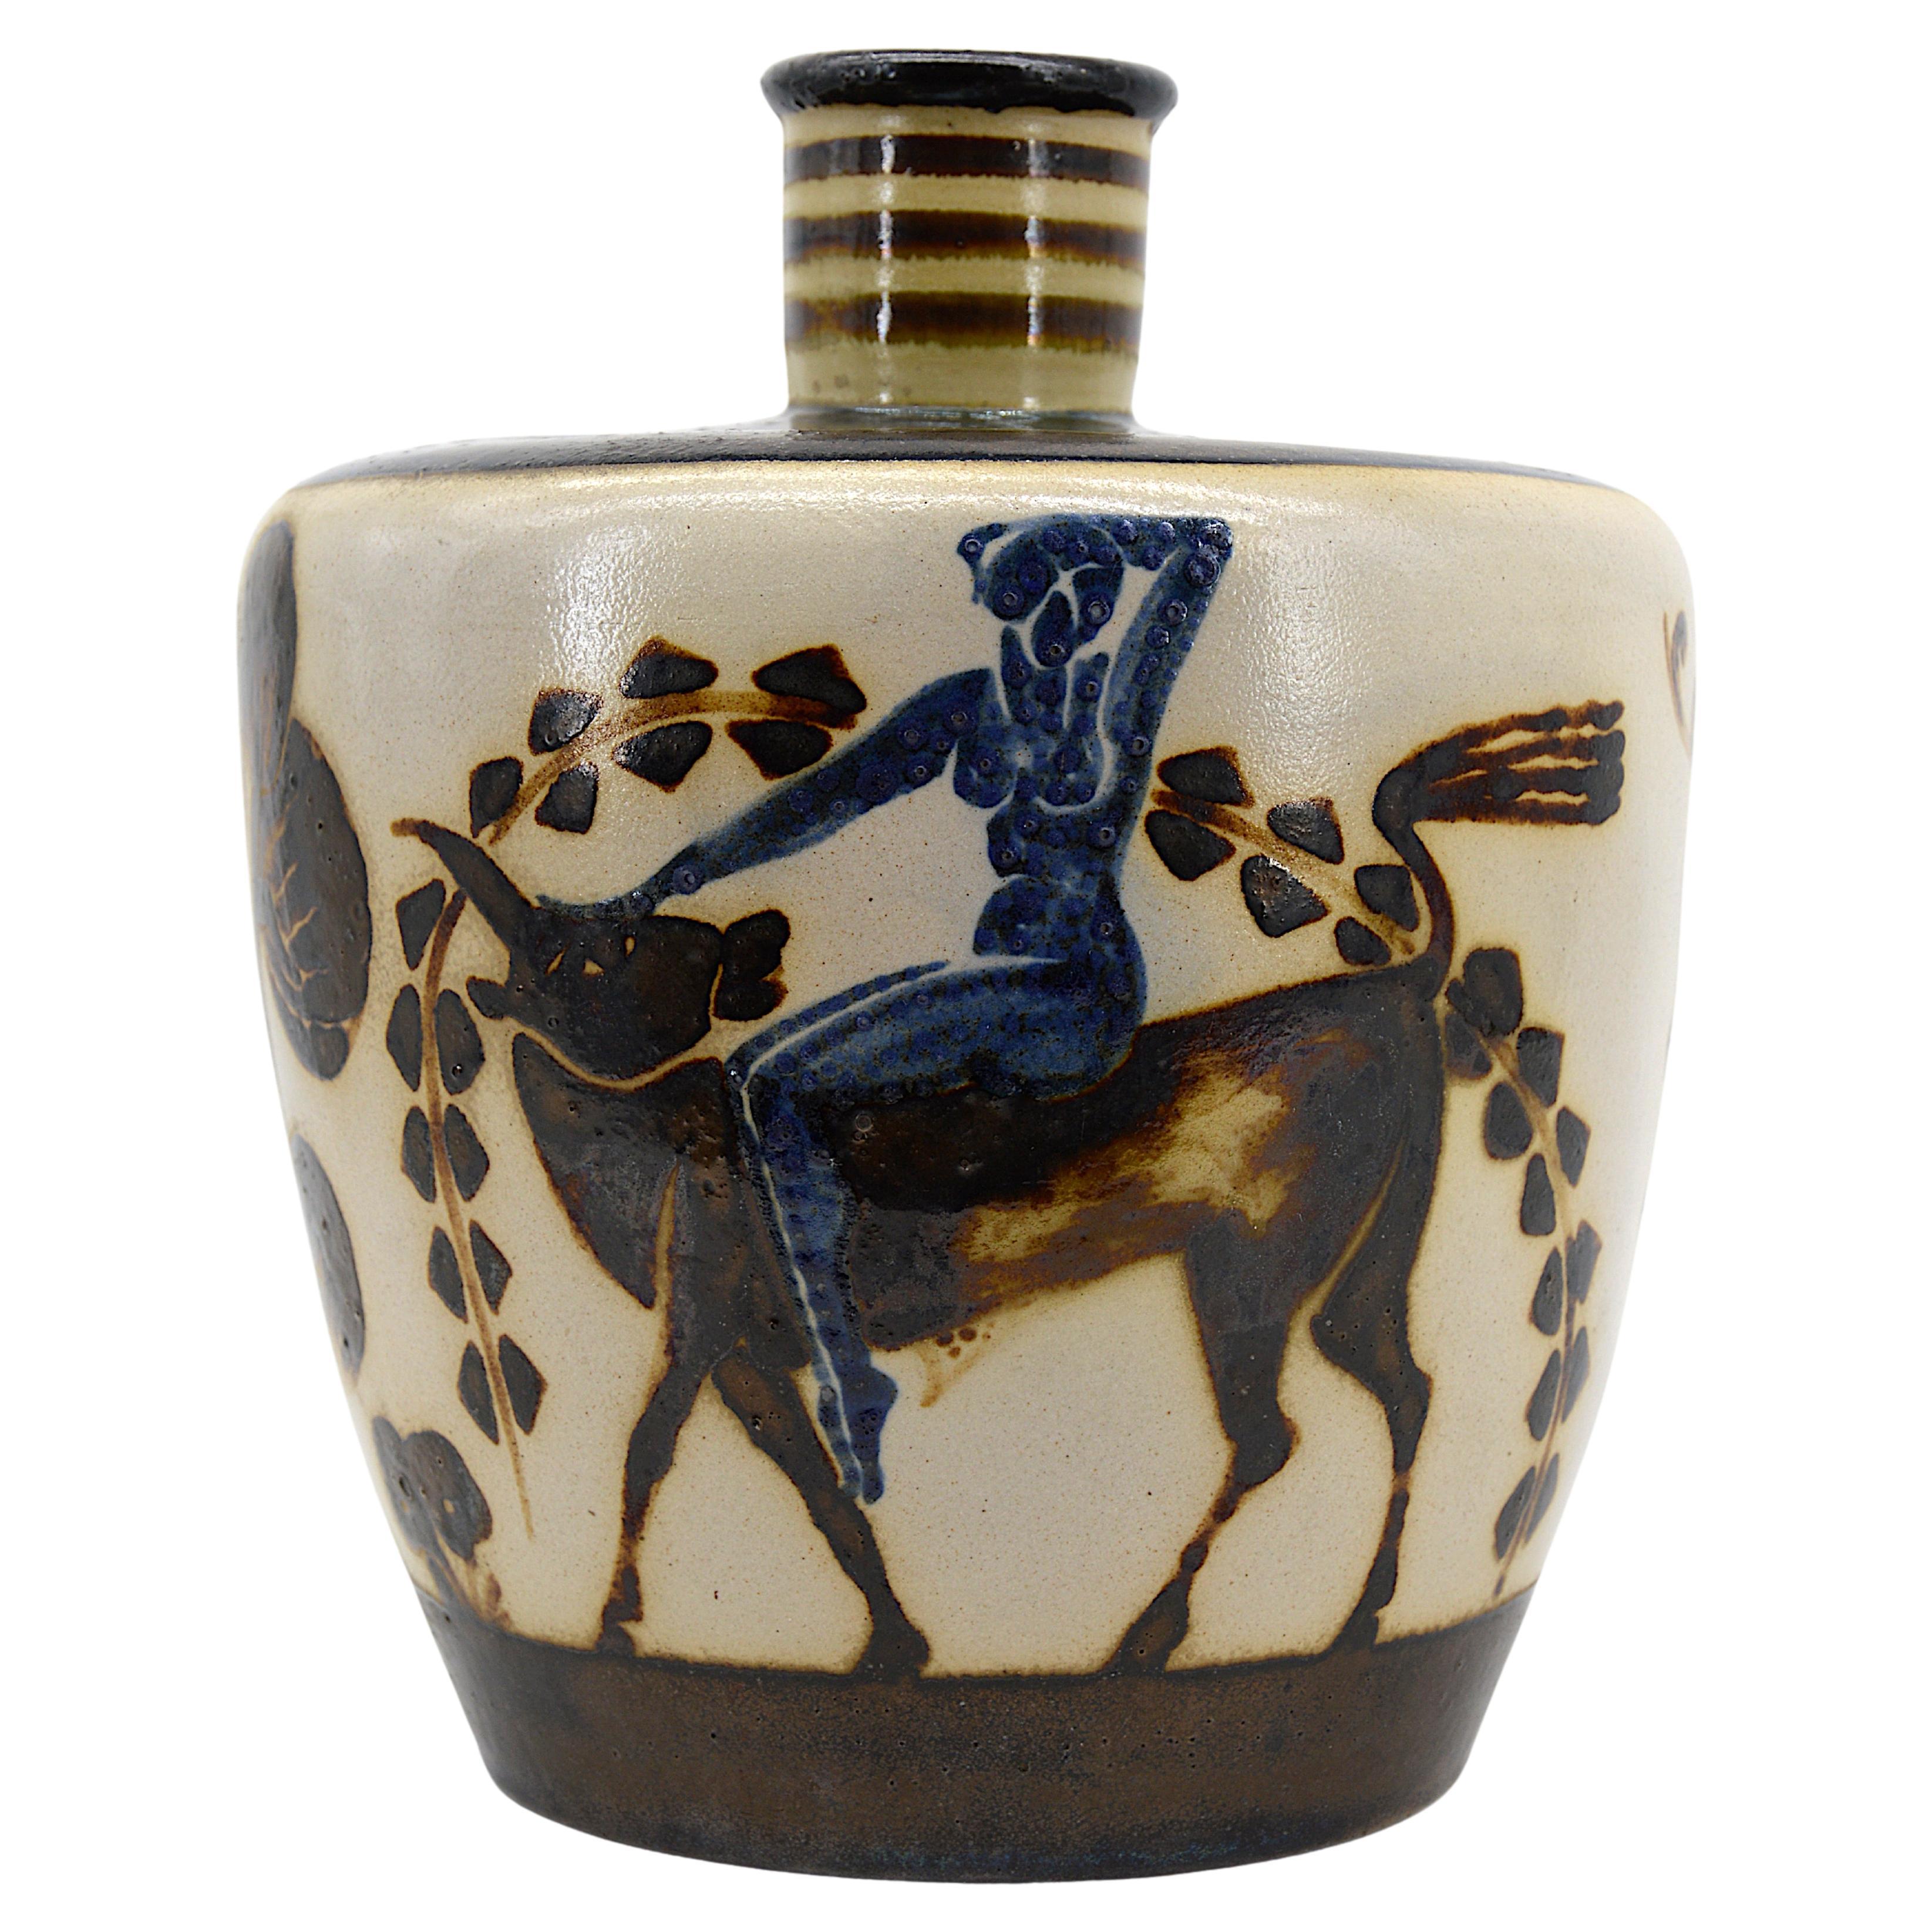 Large French Art Deco ceramic vase from the Rene Buthaud workshop at Sainte-Radegonde for Primavera (Paris), France, 1923-1926. The mythological decor composed of Europa riding the bull, and an Amazon, a horse, in a typical plant decoration, shows a